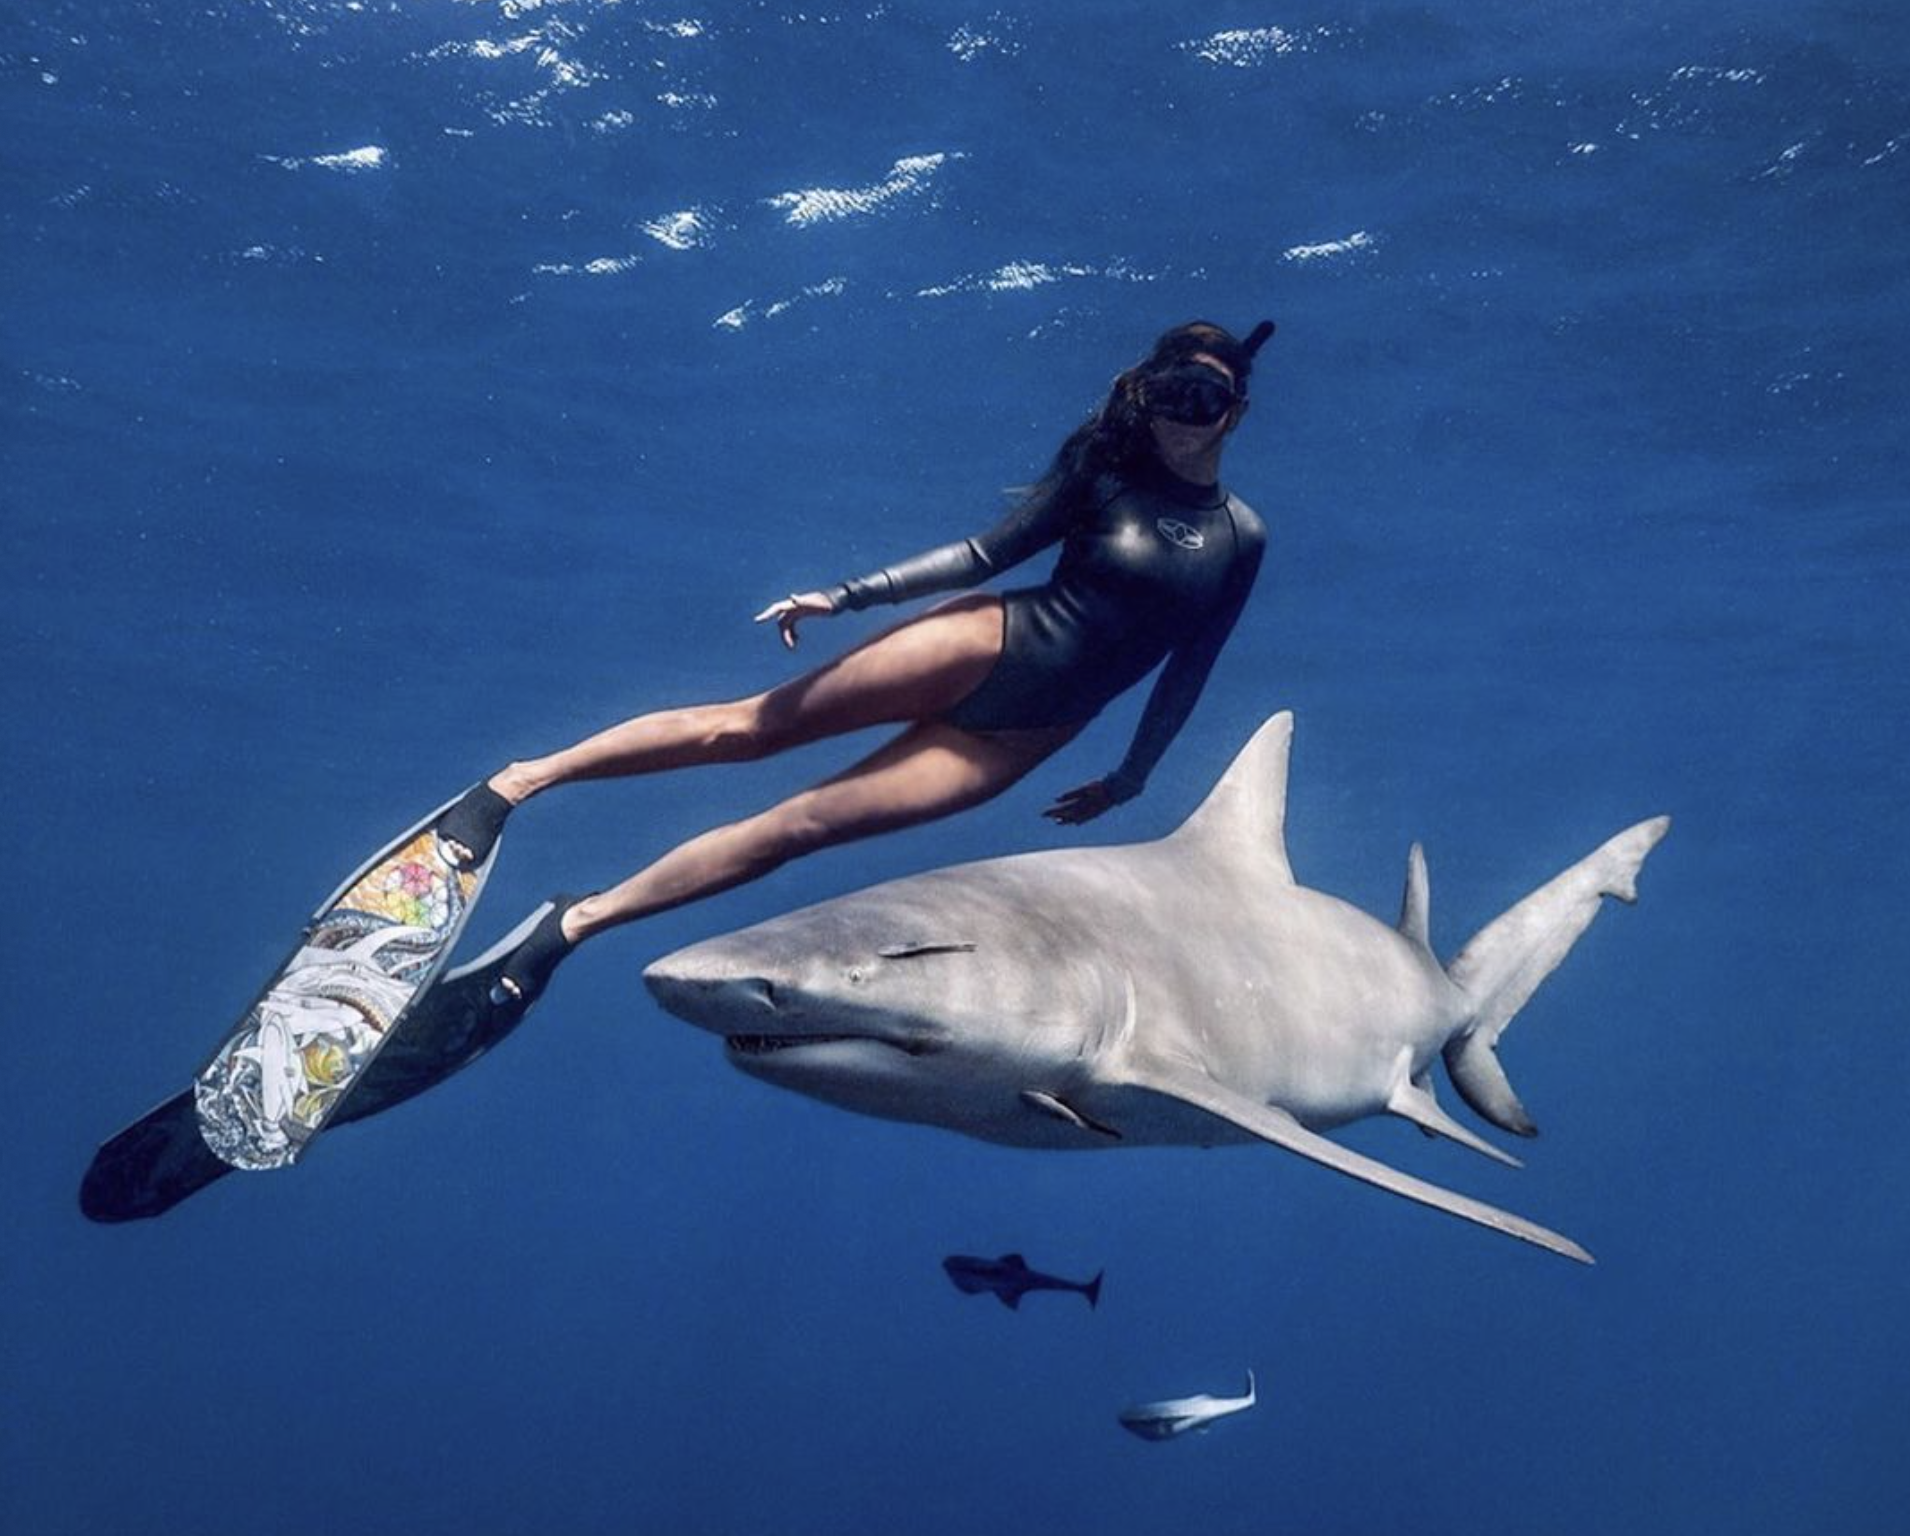 Steph Diving With Shark